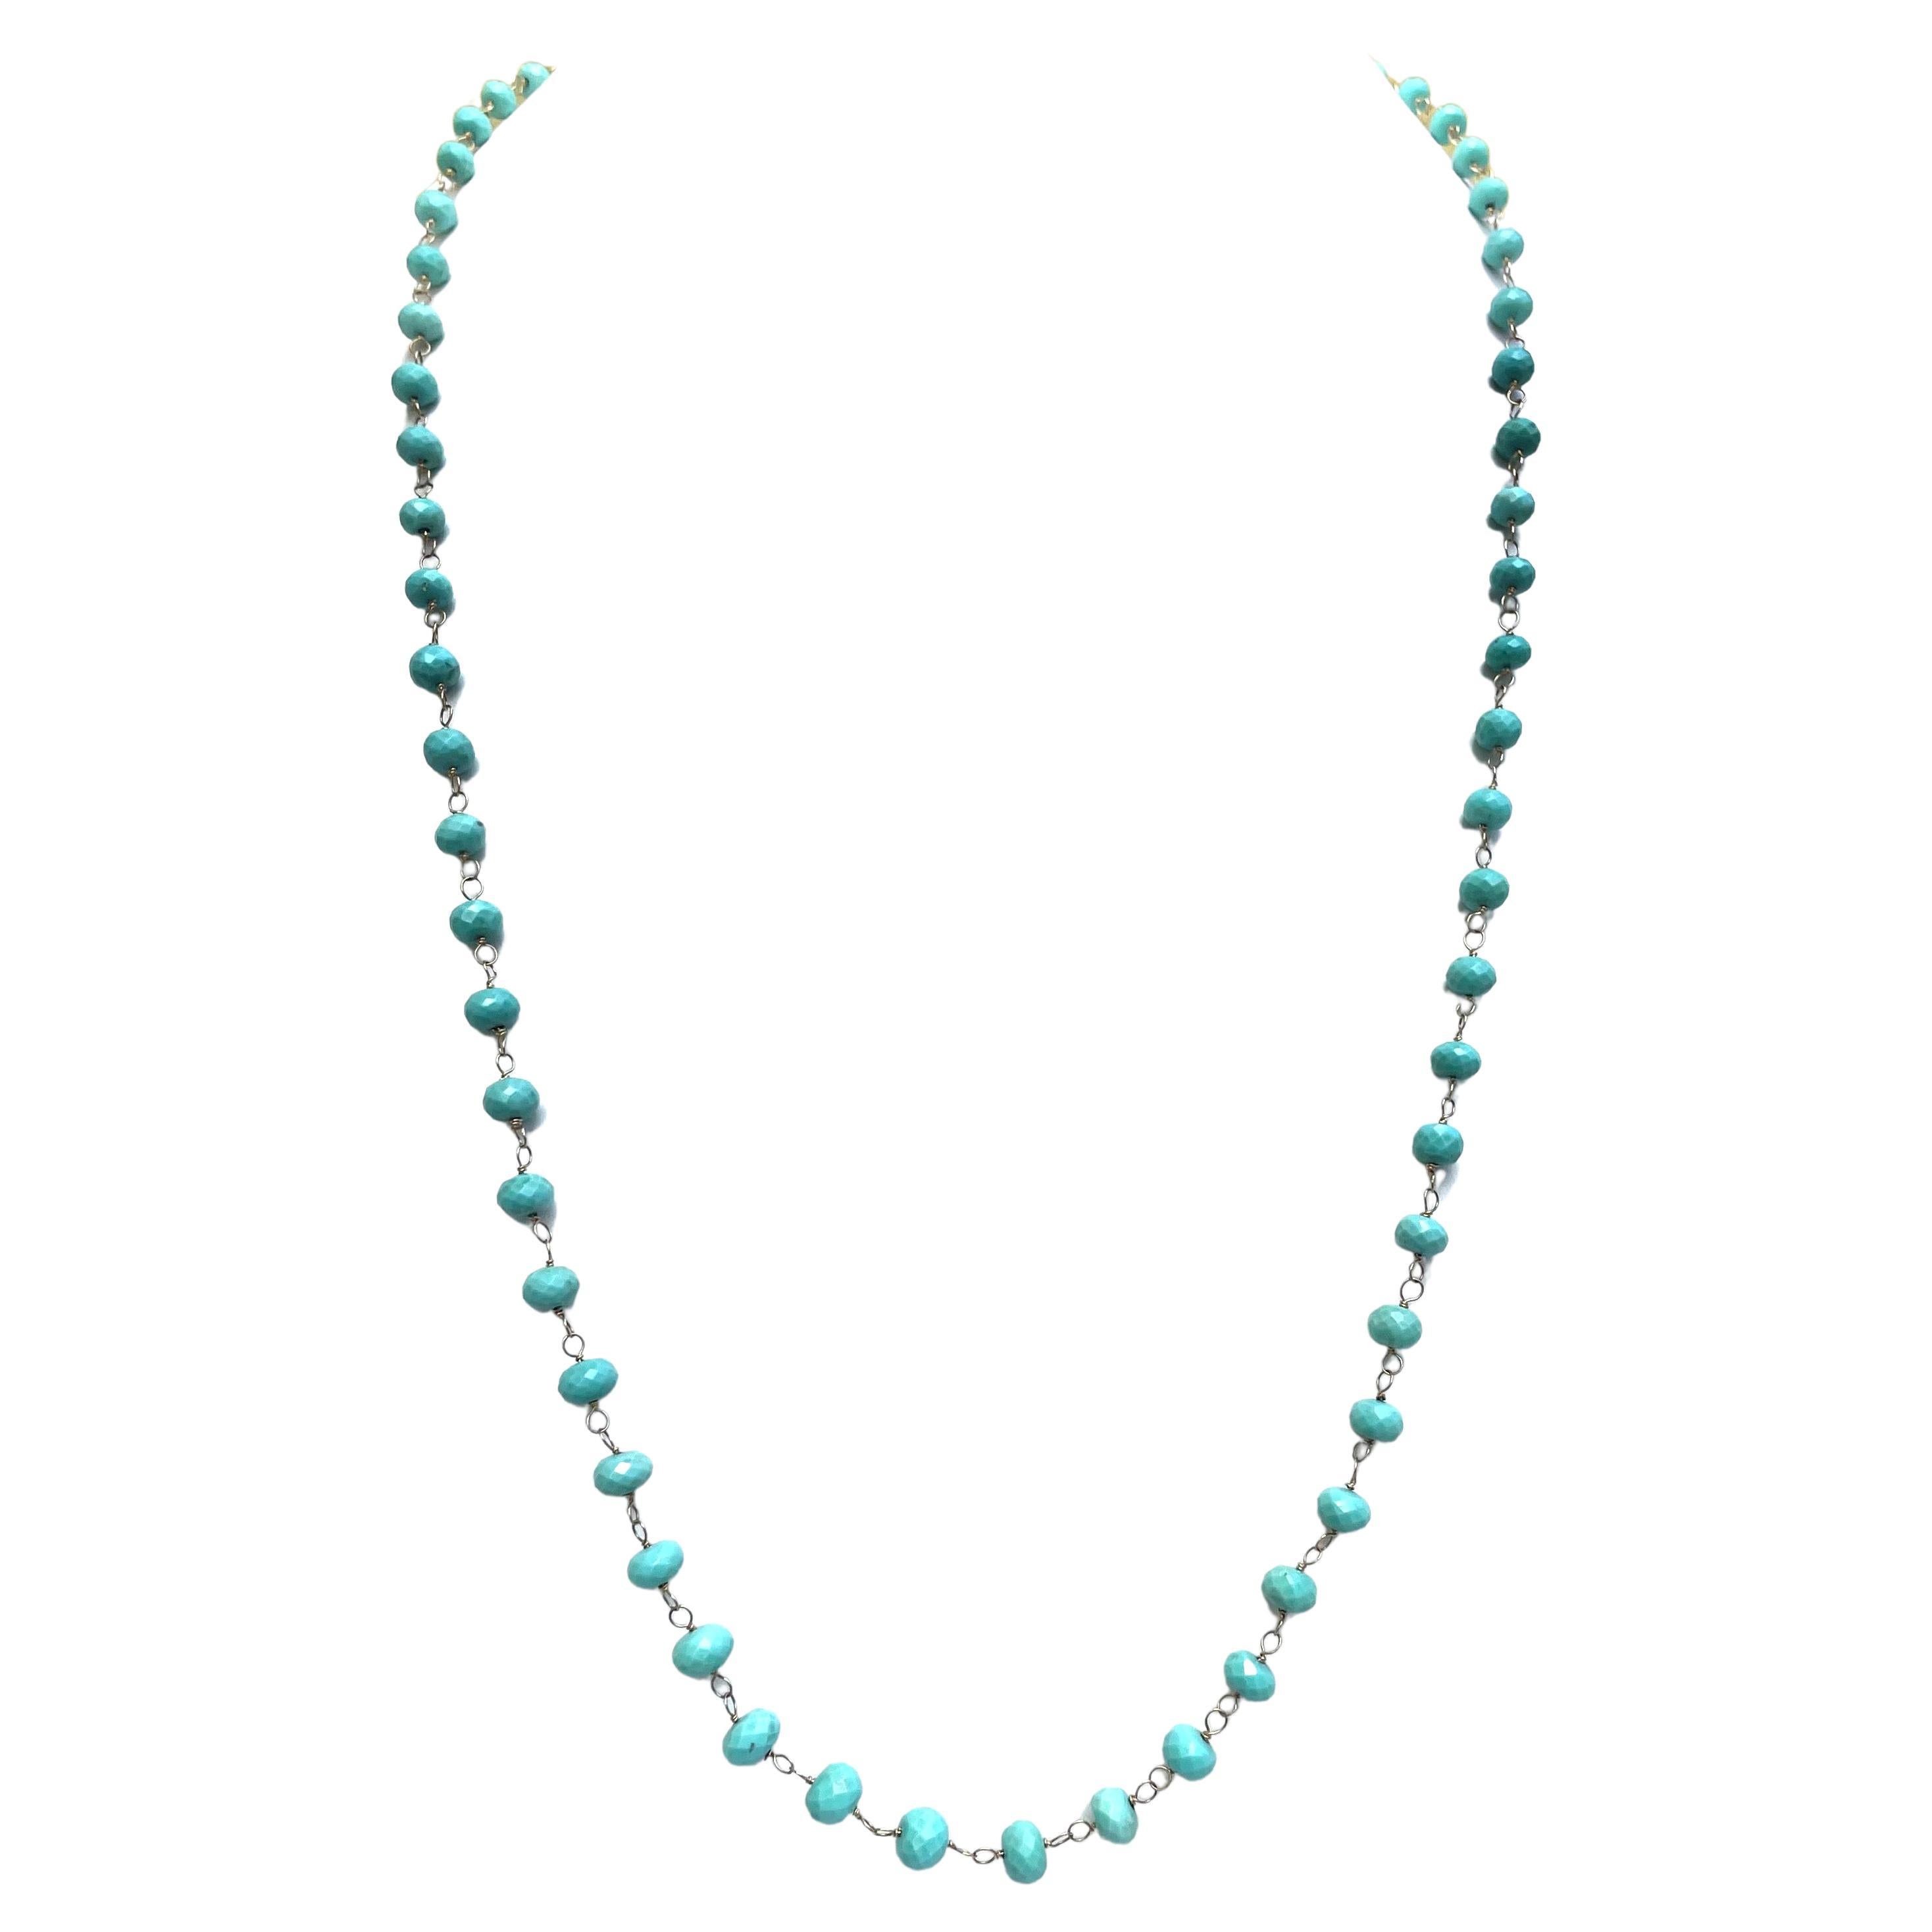 Description
Sleeping Beauty Turquoise 136 carats 14k yellow gold delicately wire-wrapped necklace. Can be worn long or doubled as a shorter necklace.
Item # N3828

Materials and Weight
Sleeping Beauty Turquoise 7 to 9mm, rondel shape 65 beads, 136